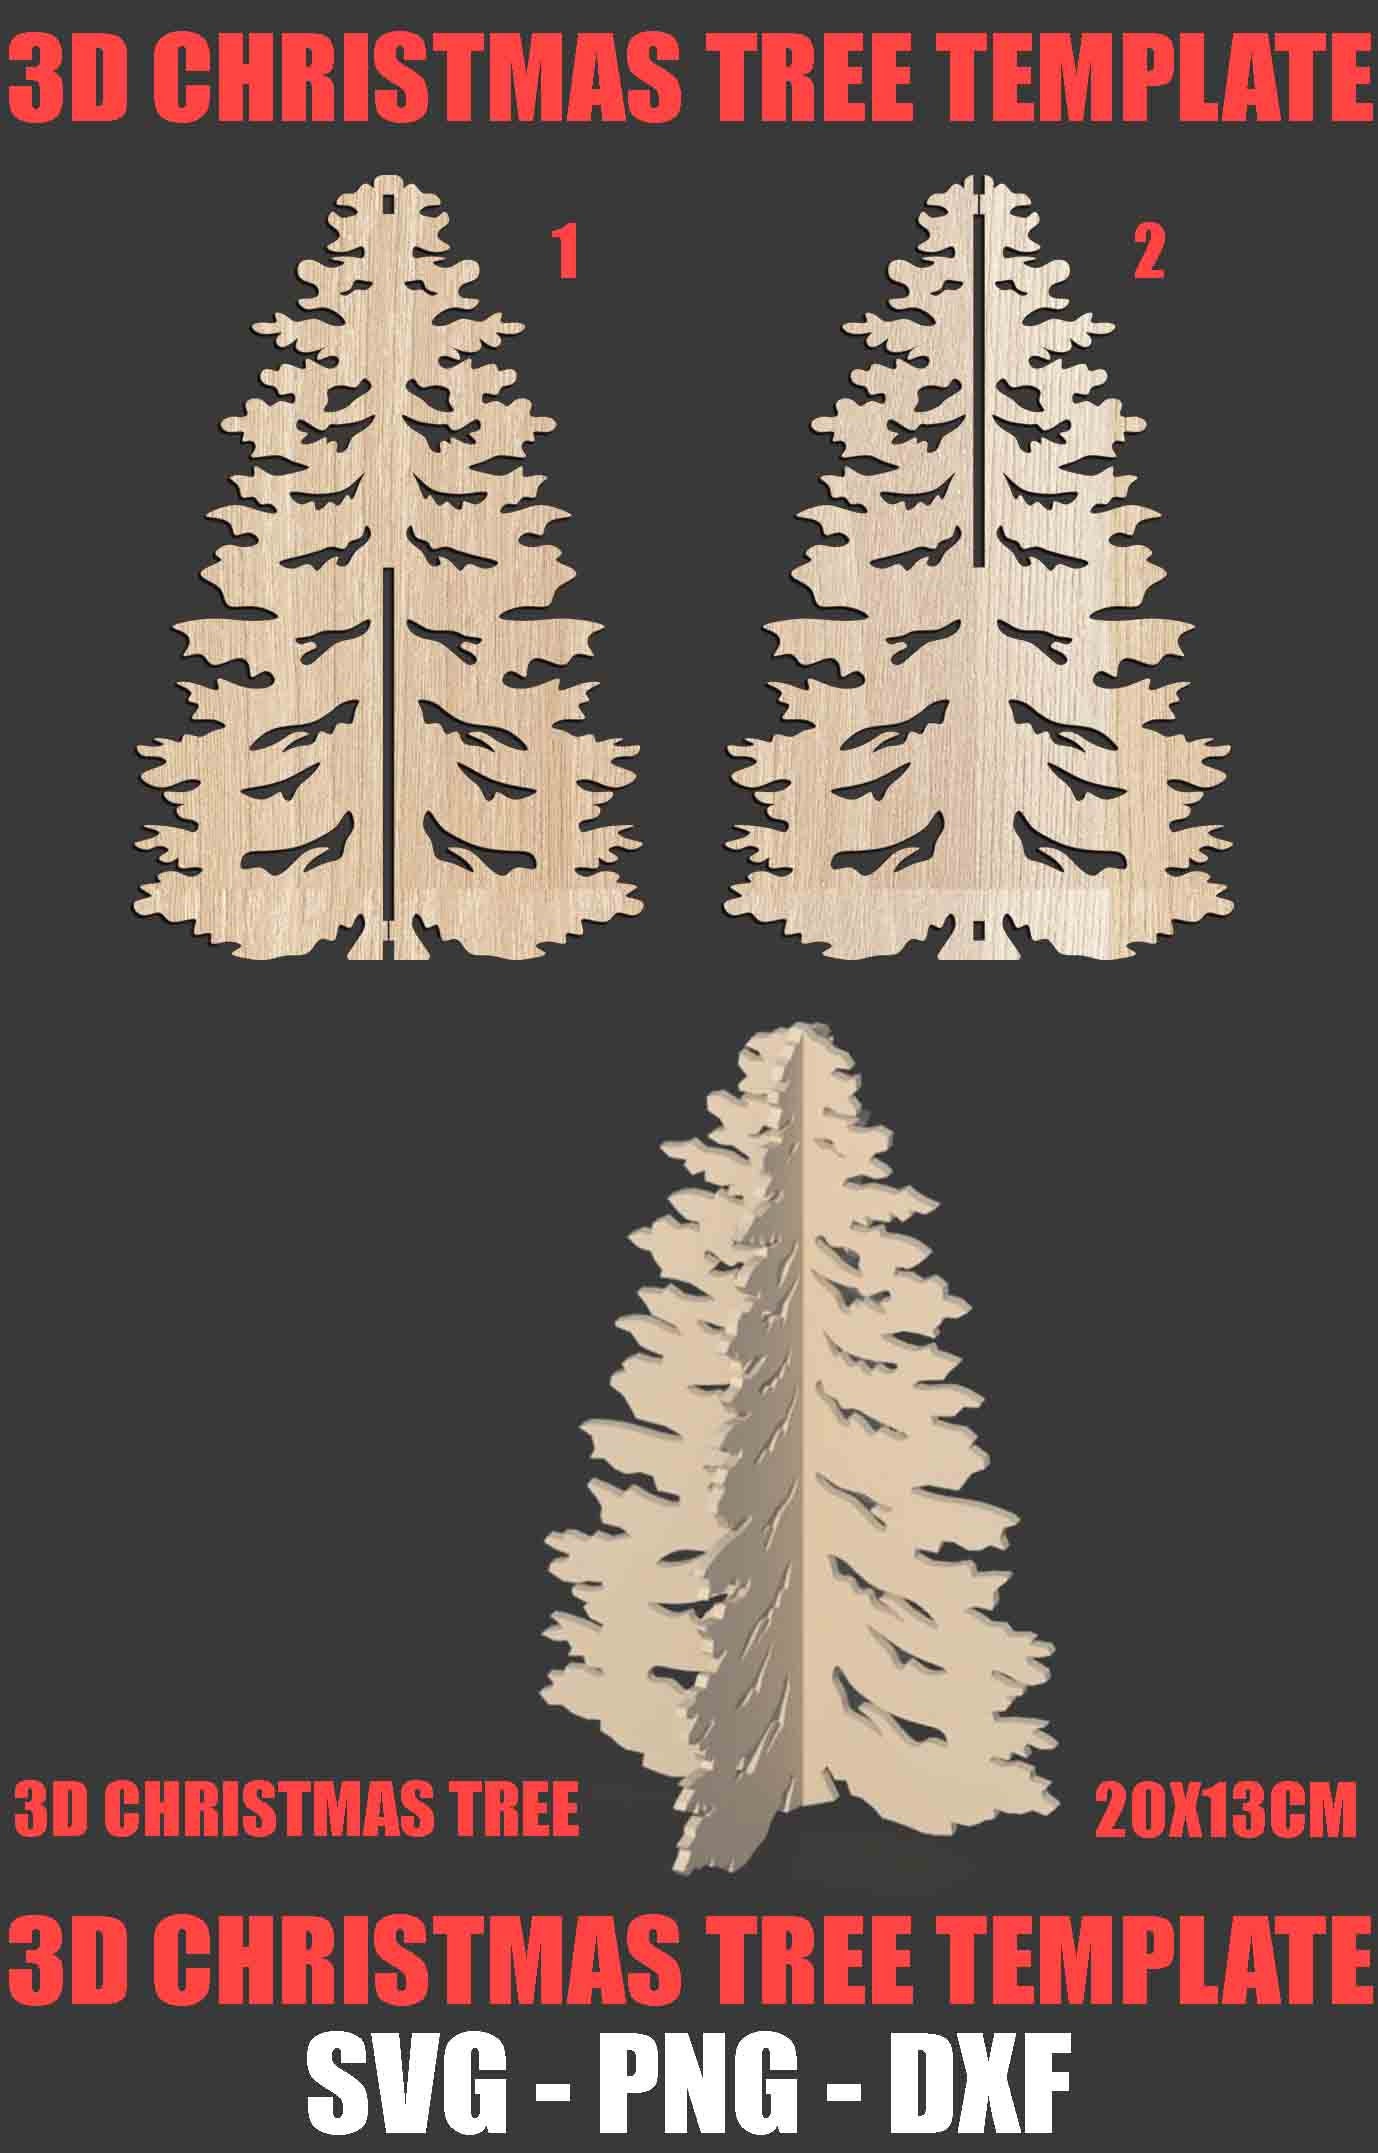 Download 3D Christmas Tree Ornament Laser Cut Template Svg Png Dxf Cnc | Etsy